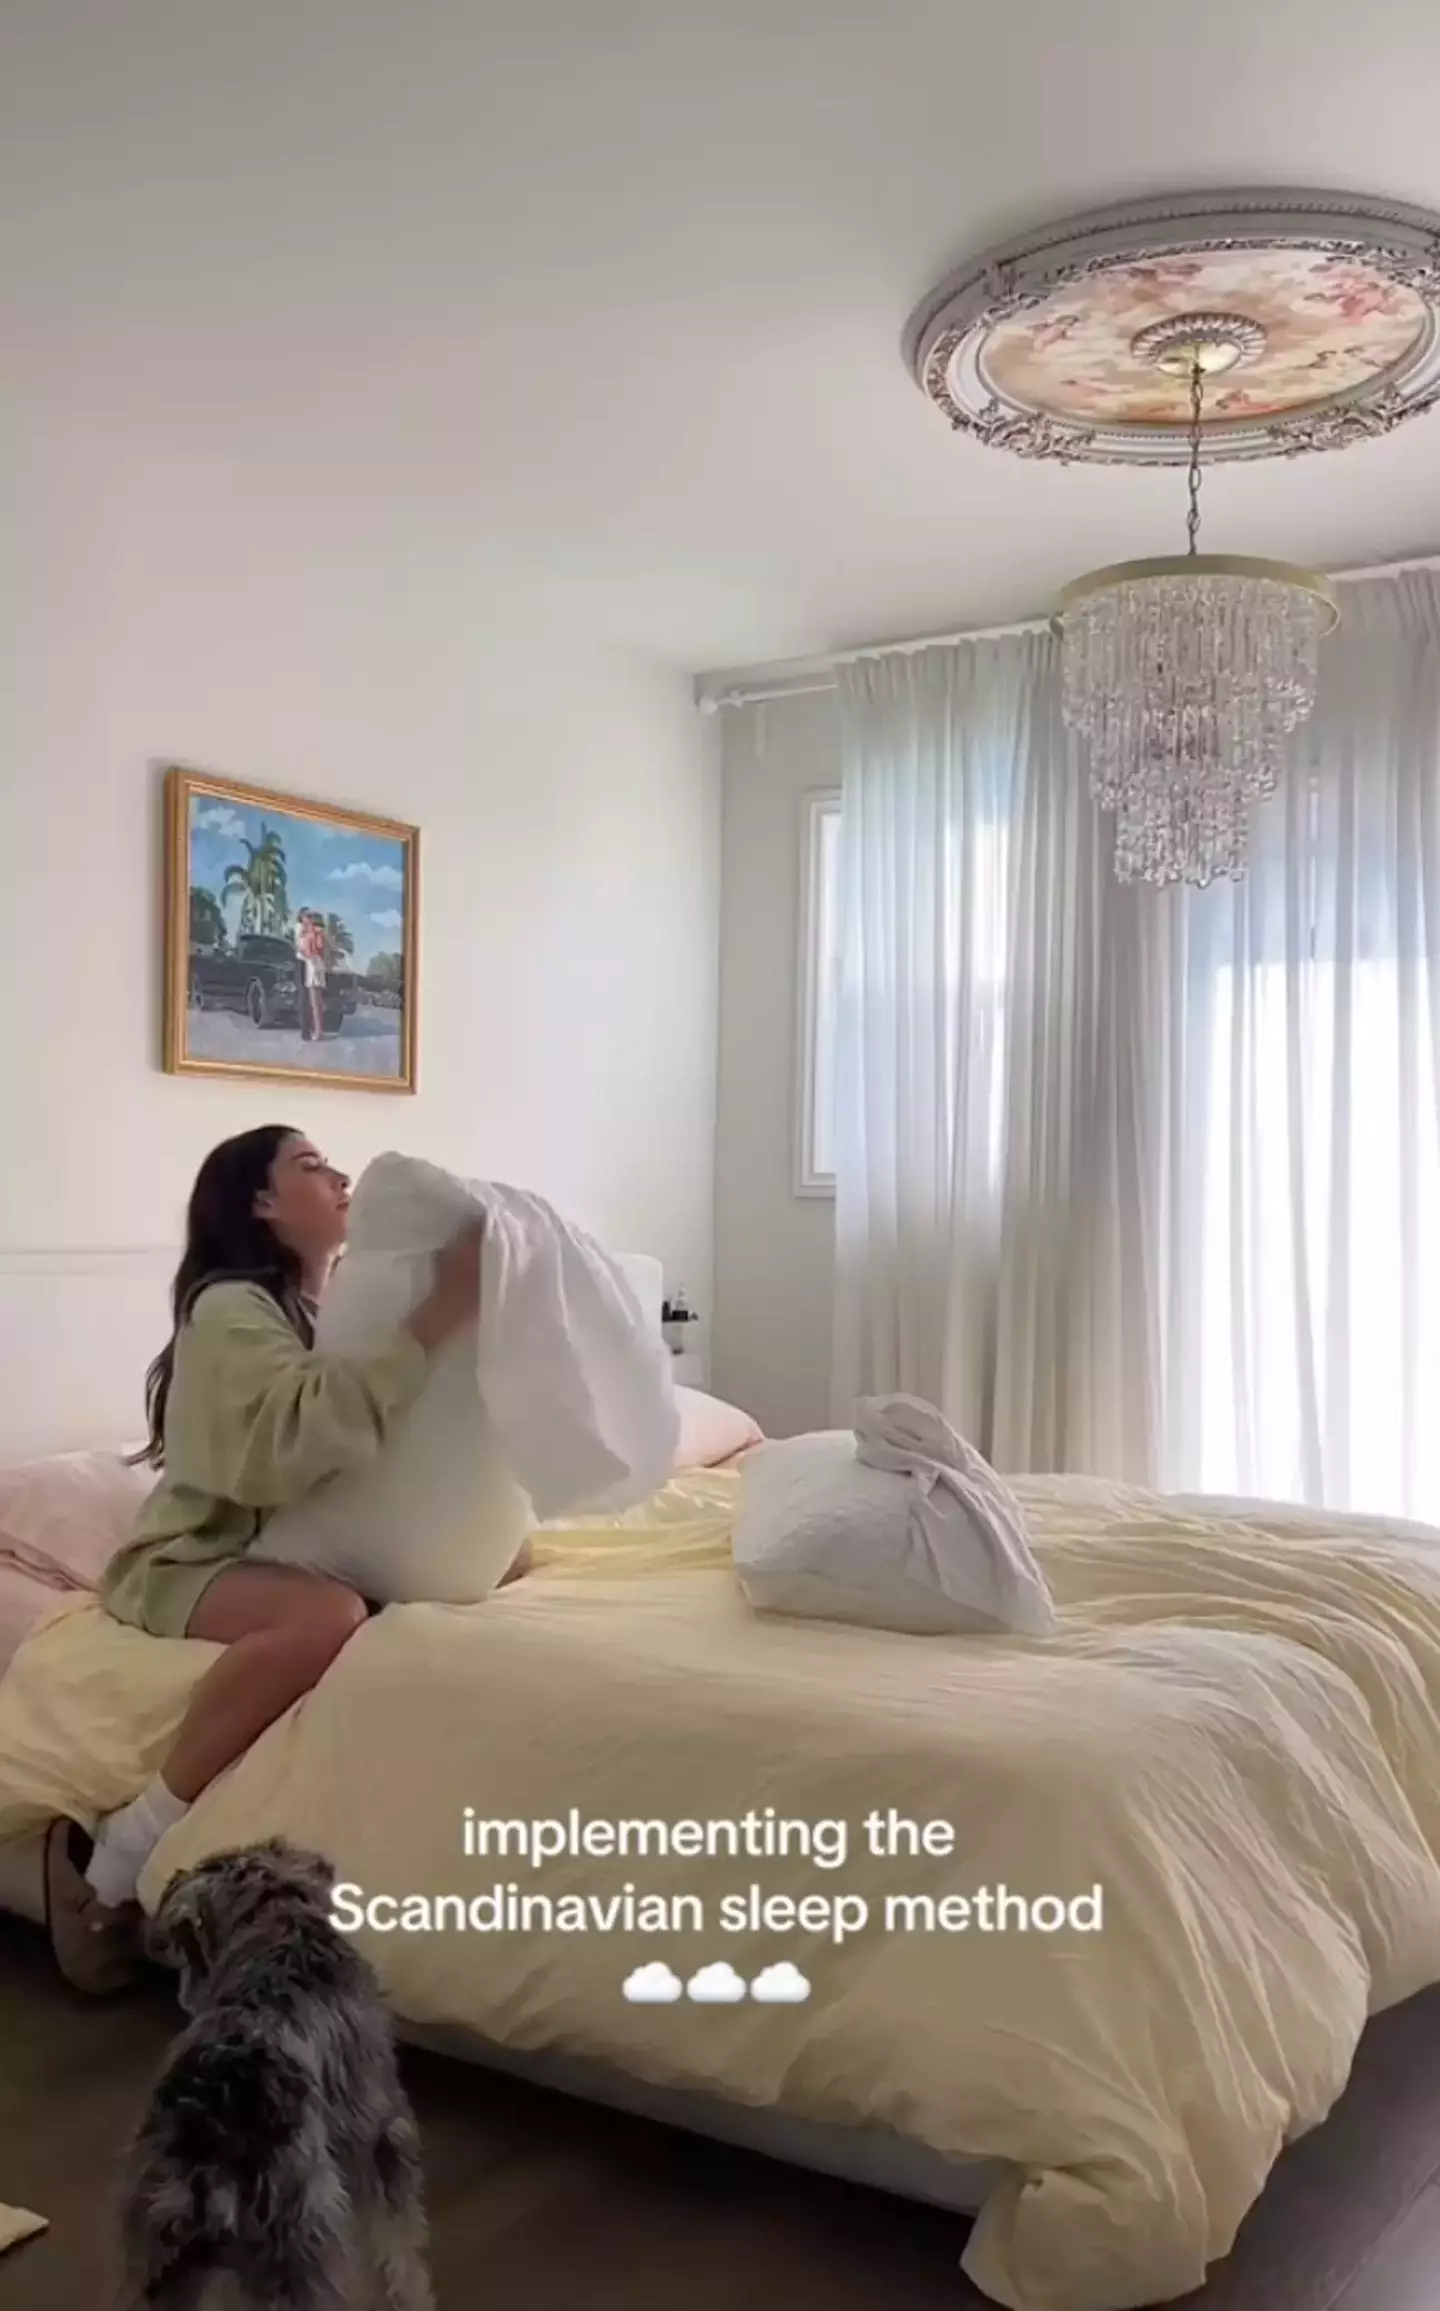 The TikTok influencer claimed the double duvet trick could save marriages.